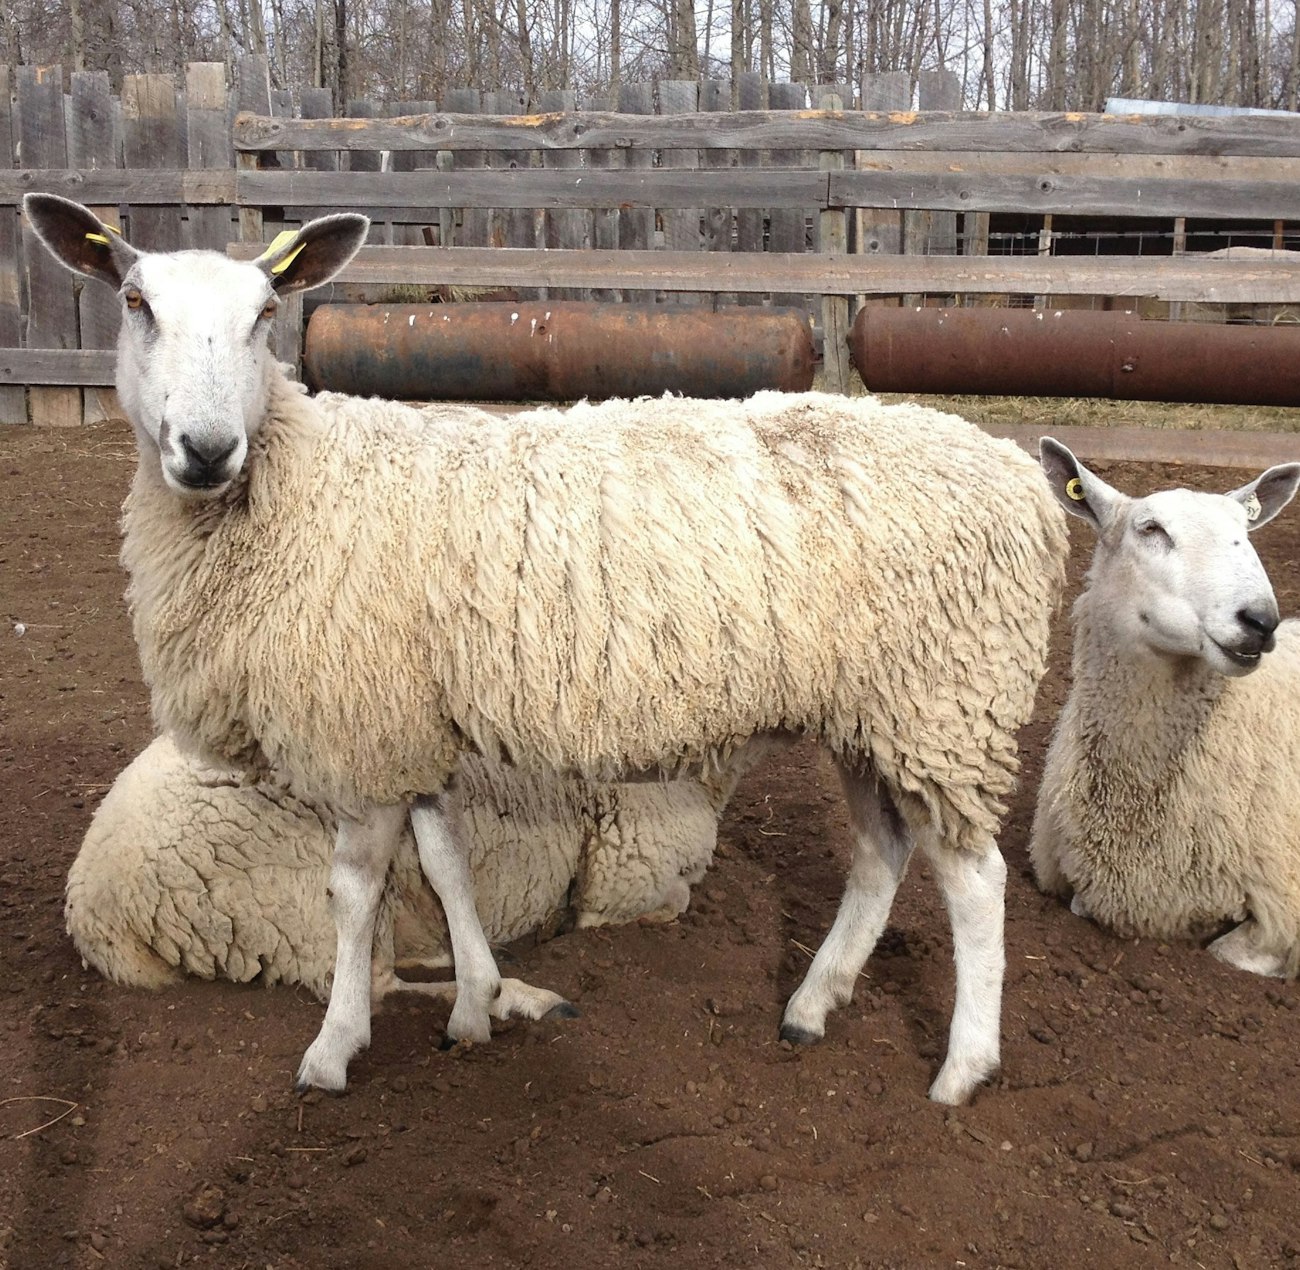 3 Bluefaced Leicester ewes in a pen, one standing